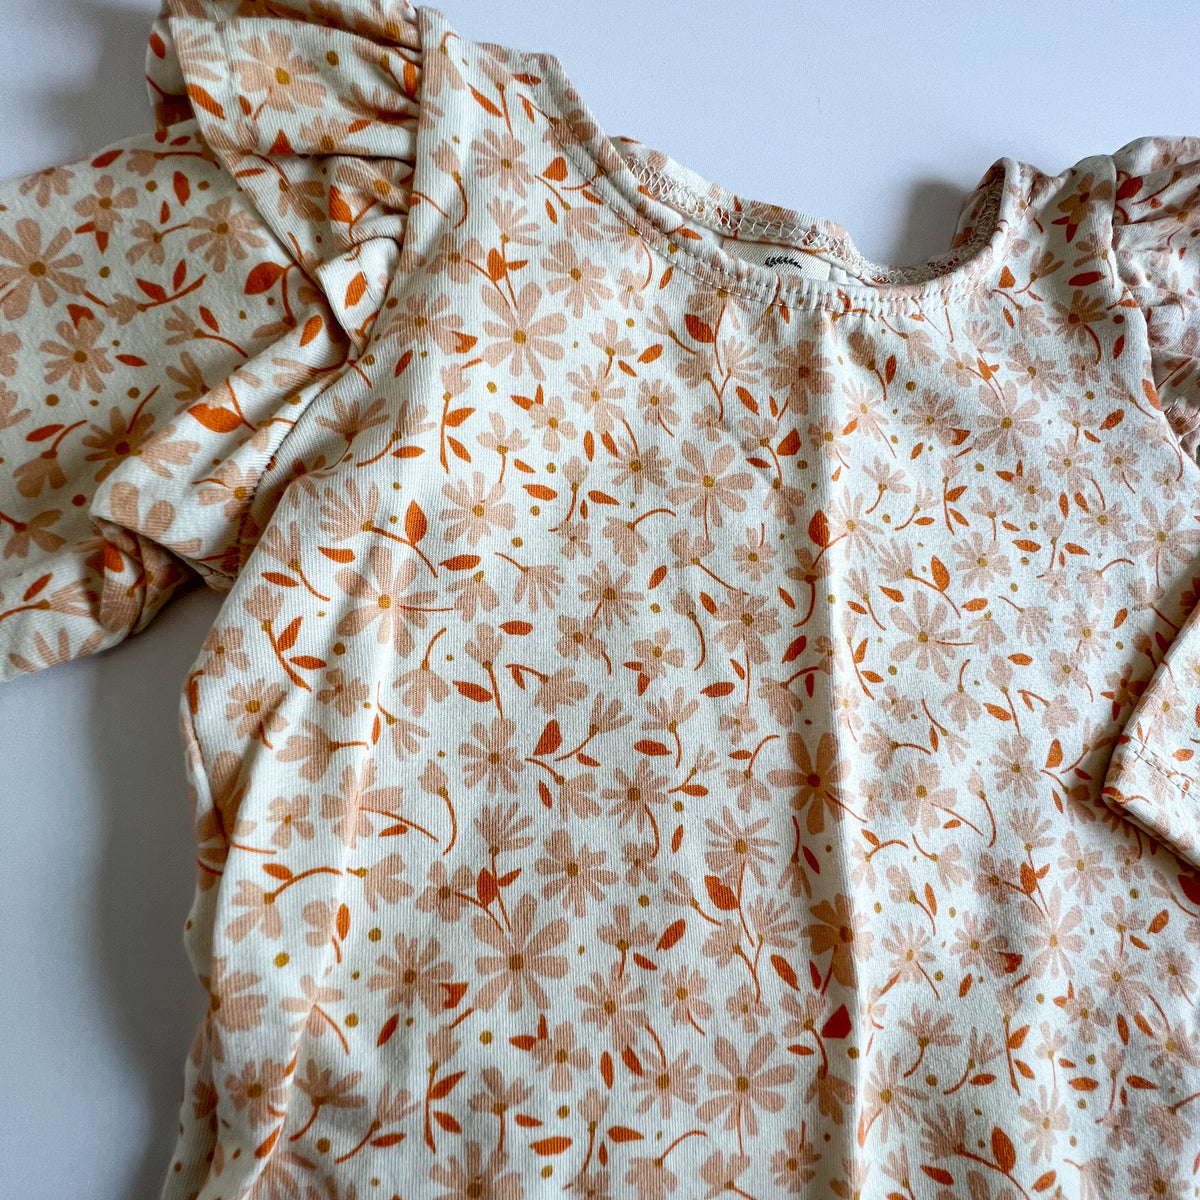 Millie Flutter Shirt in 'Sepia Meadow' - Ready To Ship